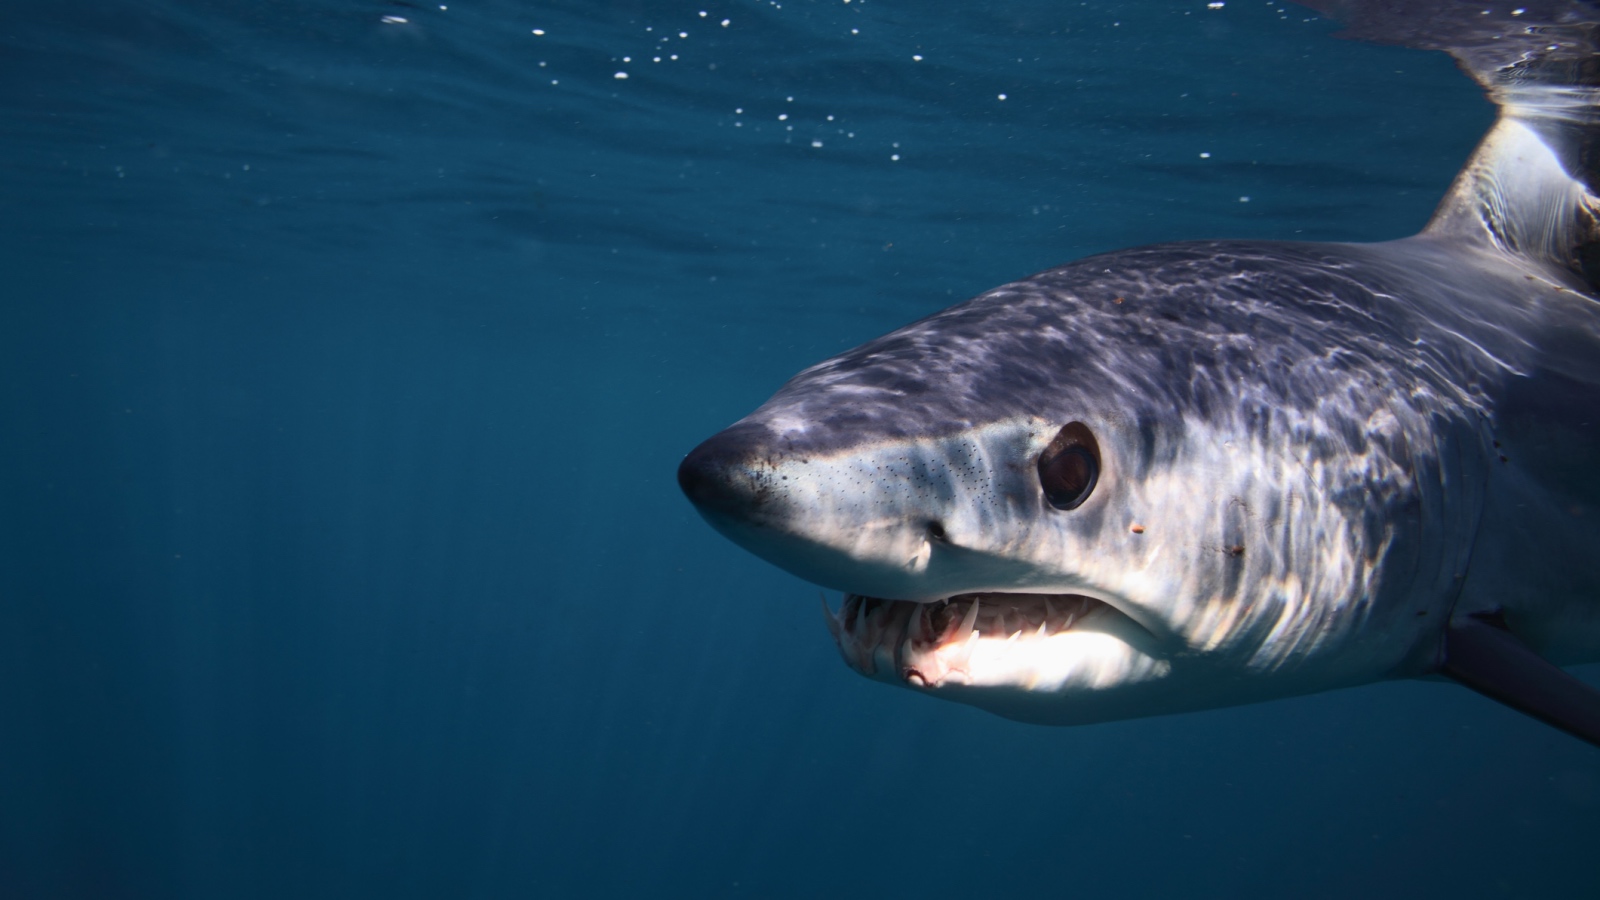 Mako shark close up in the water